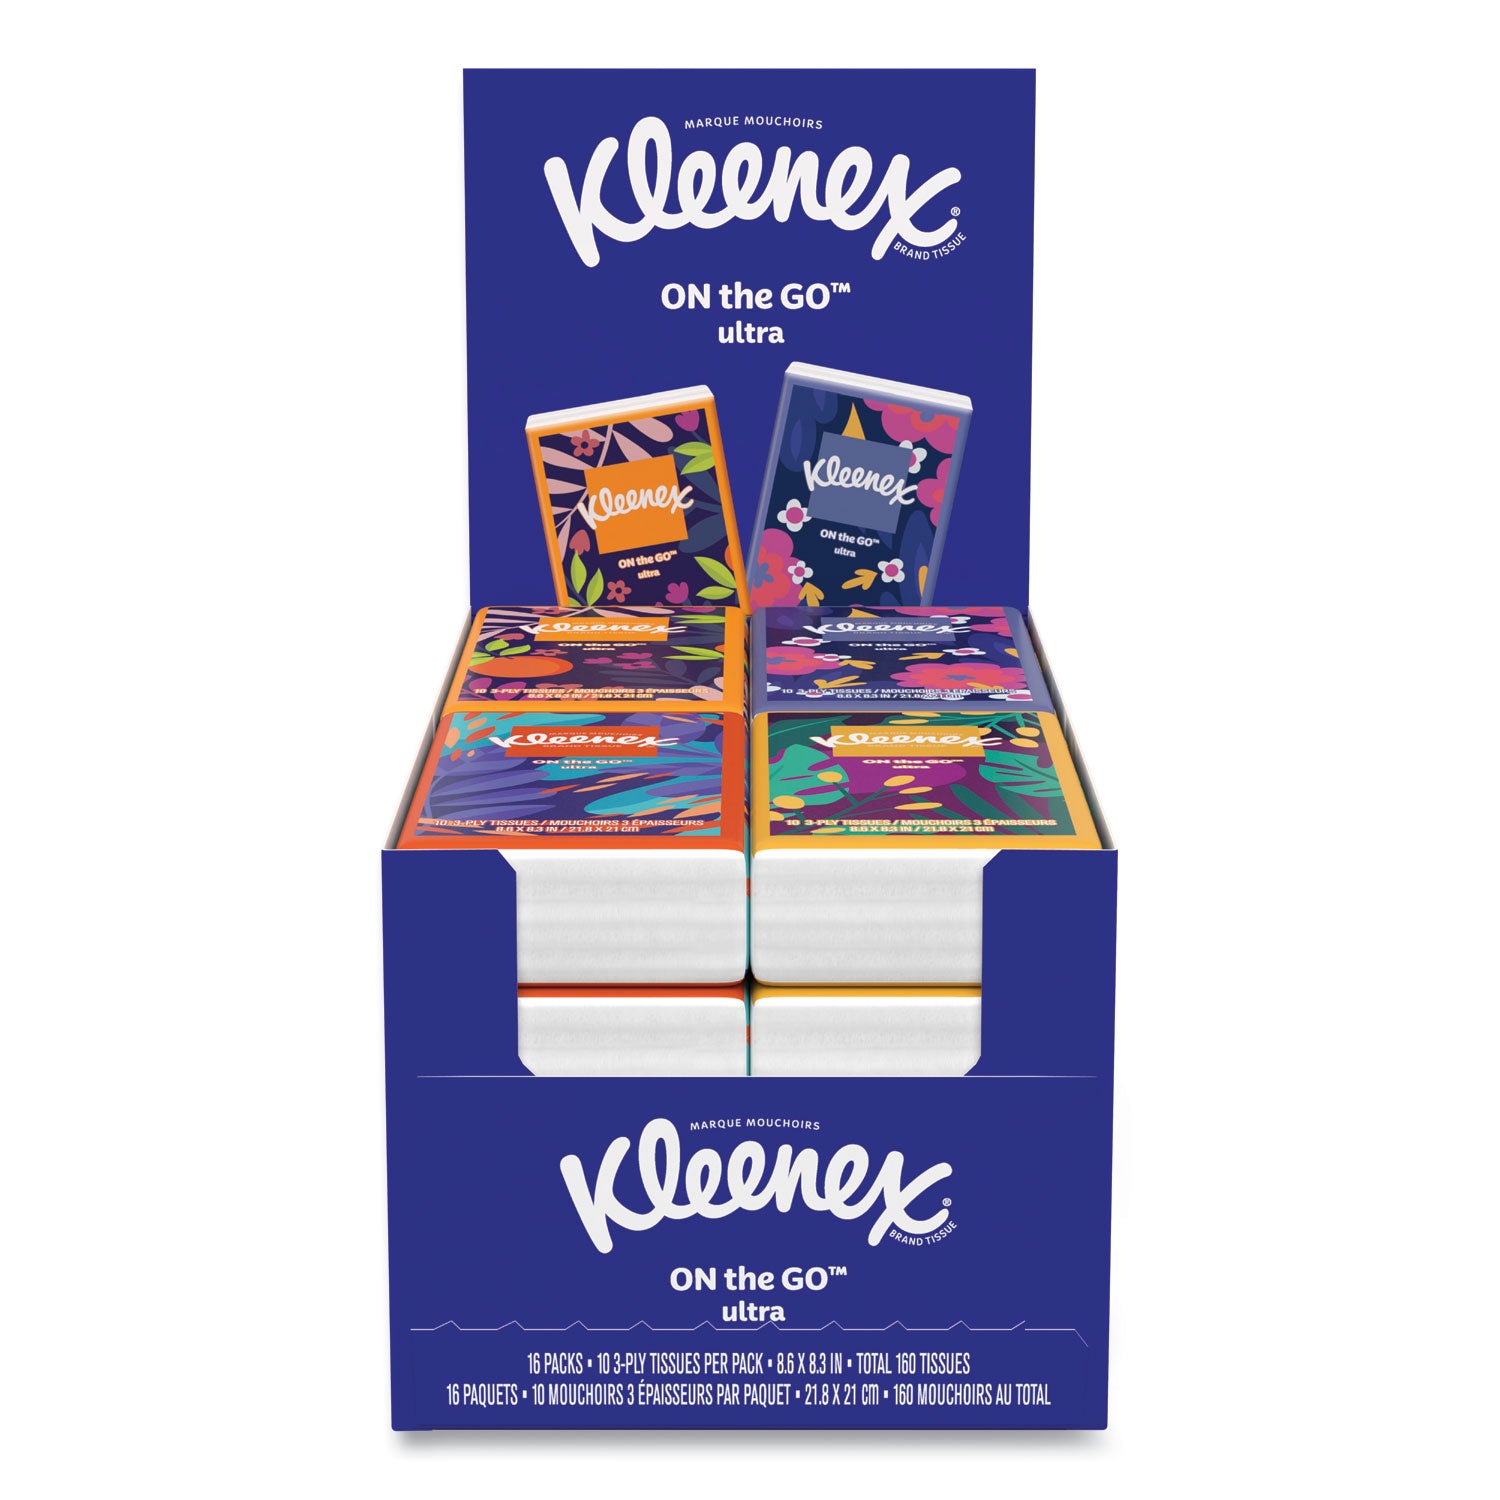 on-the-go-packs-facial-tissues-3-ply-white-10-pouch-16-pouches-pack-6-packs-carton_kcc54635 - 2